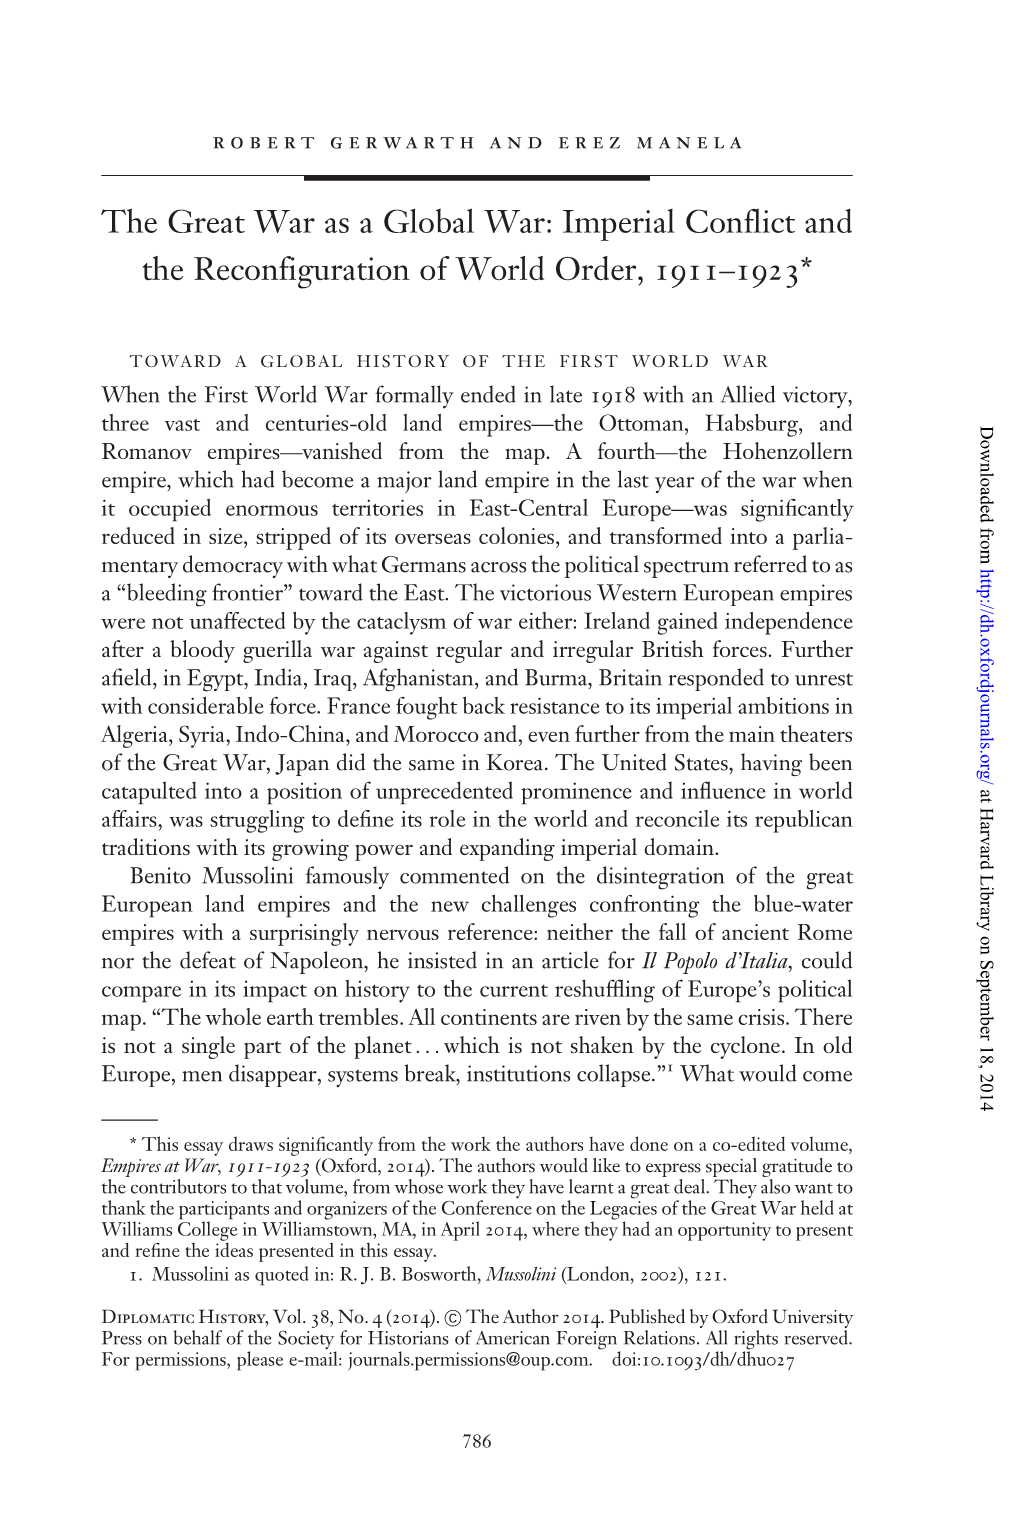 The Great War As a Global War: Imperial Conflict and the Reconfiguration of World Order, 1911–1923*